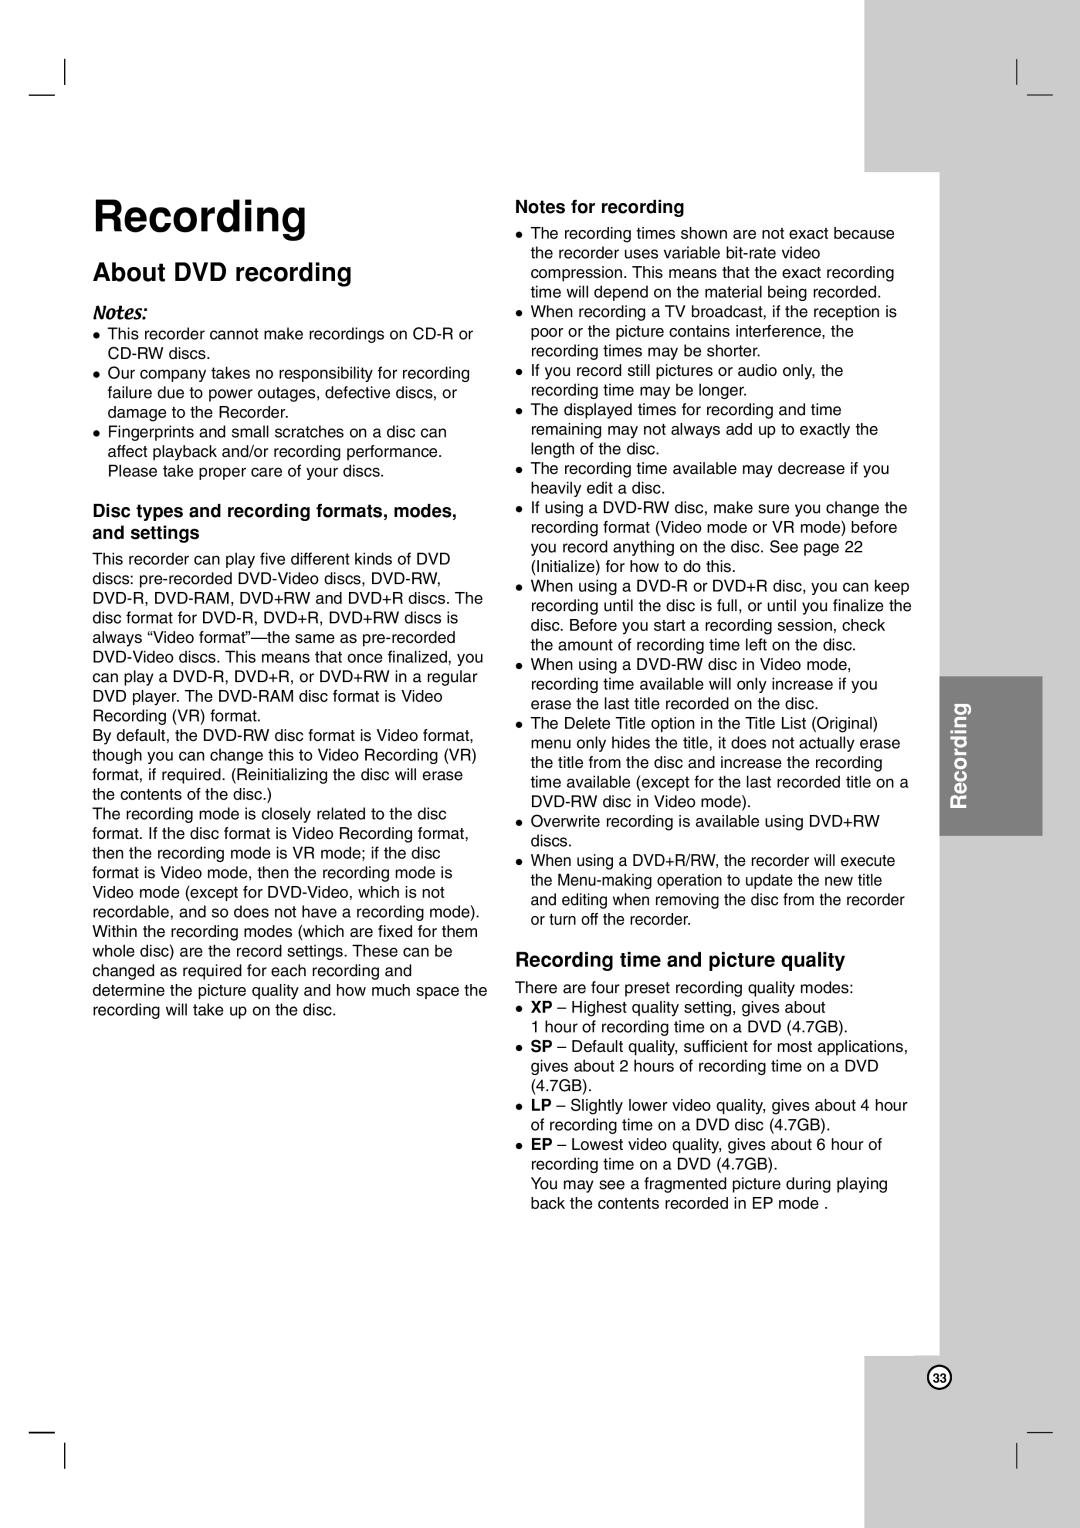 LG Electronics DR1F9H owner manual About DVD recording, Recording time and picture quality, Notes for recording 